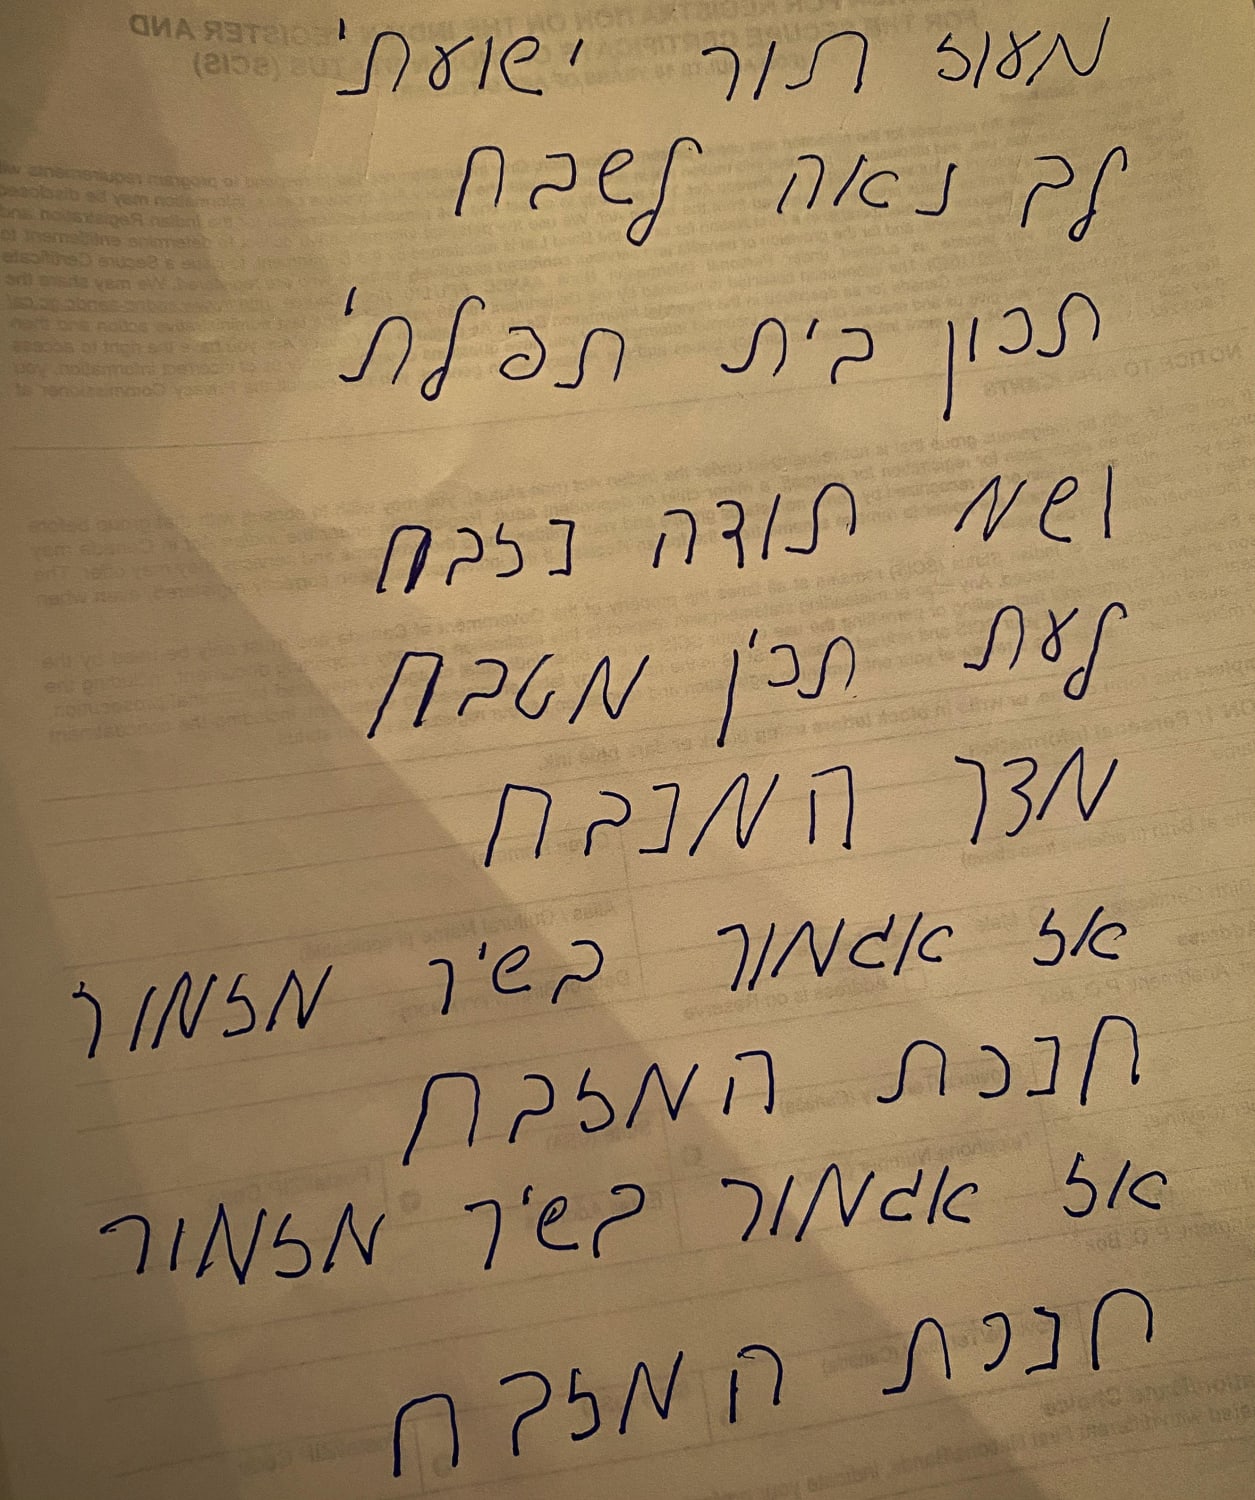 I'm very much a beginning Hebrew learning, but I'm practicing my cursive with song lyrics. I'd love & appreciate any feedback anyone has. Thanks!